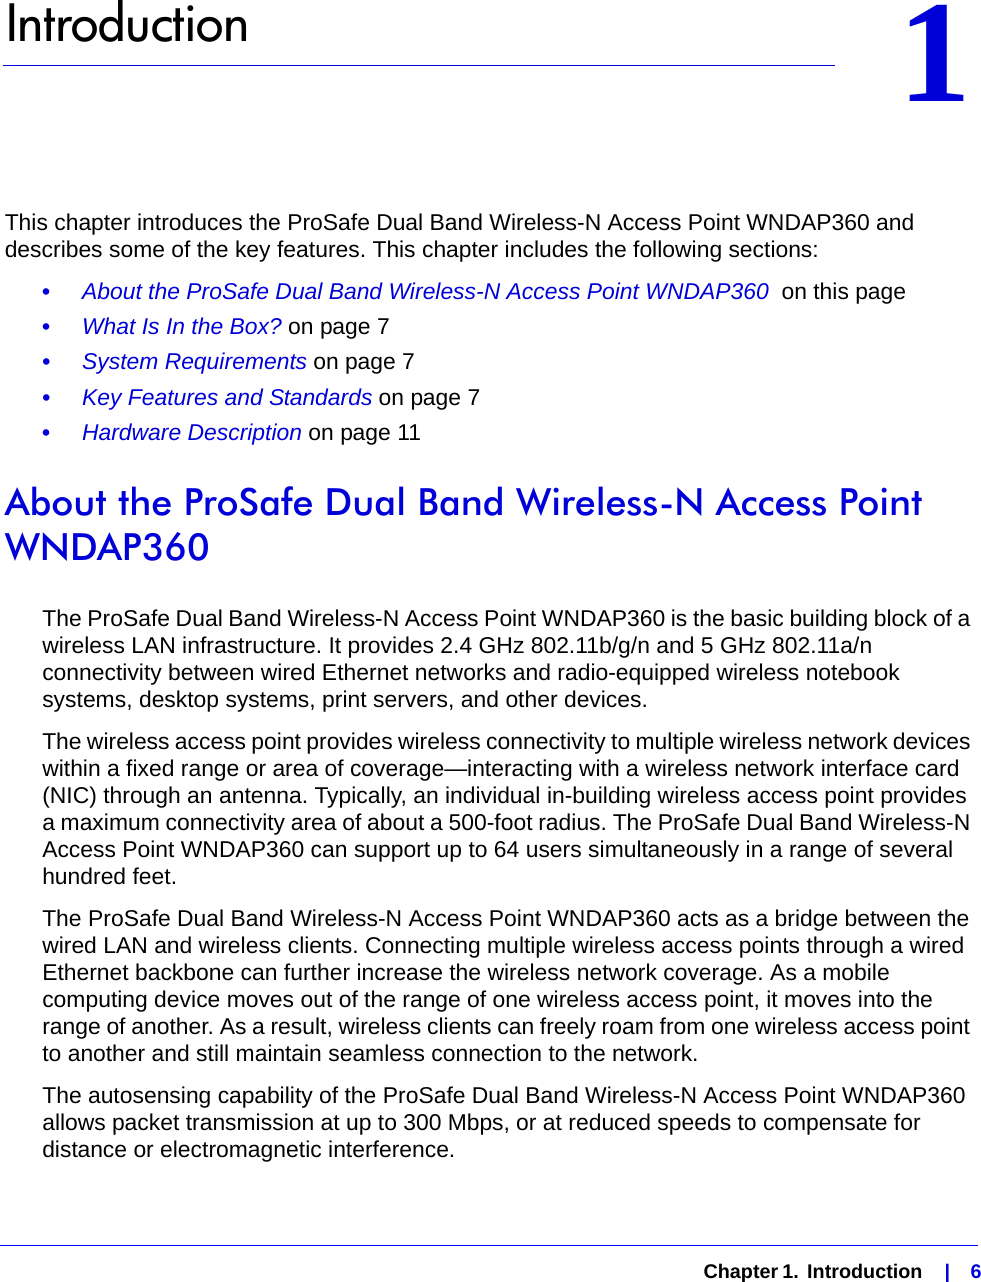   Chapter 1.  Introduction    |    611.   IntroductionThis chapter introduces the ProSafe Dual Band Wireless-N Access Point WNDAP360 and describes some of the key features. This chapter includes the following sections:•     About the ProSafe Dual Band Wireless-N Access Point WNDAP360  on this page•     What Is In the Box? on page 7•     System Requirements on page 7•     Key Features and Standards on page 7•     Hardware Description on page 11About the ProSafe Dual Band Wireless-N Access Point WNDAP360The ProSafe Dual Band Wireless-N Access Point WNDAP360 is the basic building block of a wireless LAN infrastructure. It provides 2.4 GHz 802.11b/g/n and 5 GHz 802.11a/n connectivity between wired Ethernet networks and radio-equipped wireless notebook systems, desktop systems, print servers, and other devices.The wireless access point provides wireless connectivity to multiple wireless network devices within a fixed range or area of coverage—interacting with a wireless network interface card (NIC) through an antenna. Typically, an individual in-building wireless access point provides a maximum connectivity area of about a 500-foot radius. The ProSafe Dual Band Wireless-N Access Point WNDAP360 can support up to 64 users simultaneously in a range of several hundred feet.The ProSafe Dual Band Wireless-N Access Point WNDAP360 acts as a bridge between the wired LAN and wireless clients. Connecting multiple wireless access points through a wired Ethernet backbone can further increase the wireless network coverage. As a mobile computing device moves out of the range of one wireless access point, it moves into the range of another. As a result, wireless clients can freely roam from one wireless access point to another and still maintain seamless connection to the network.The autosensing capability of the ProSafe Dual Band Wireless-N Access Point WNDAP360 allows packet transmission at up to 300 Mbps, or at reduced speeds to compensate for distance or electromagnetic interference. 